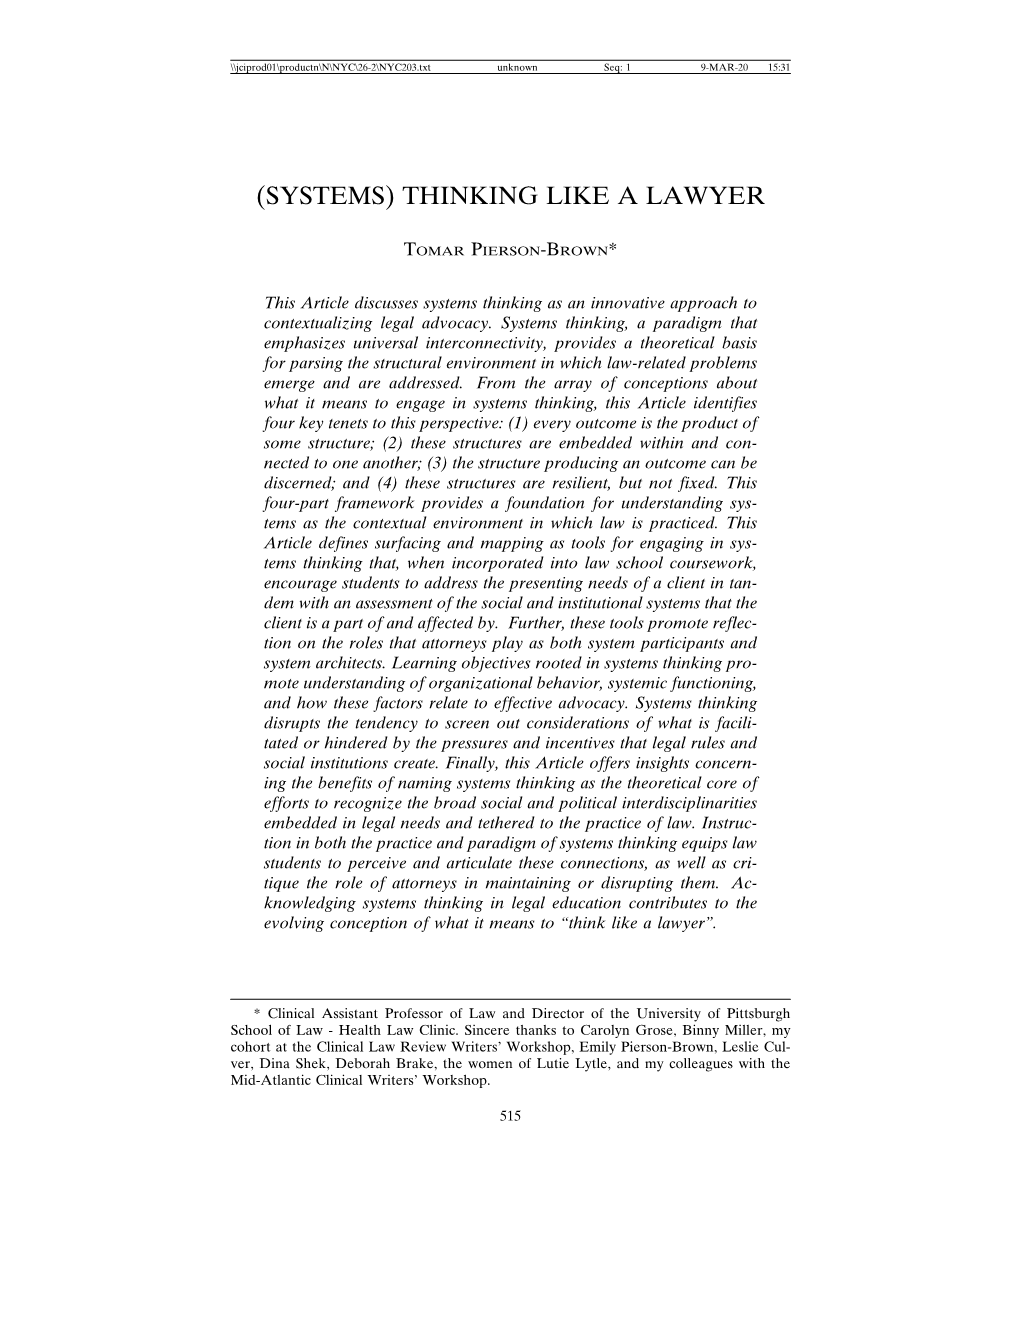 (Systems) Thinking Like a Lawyer